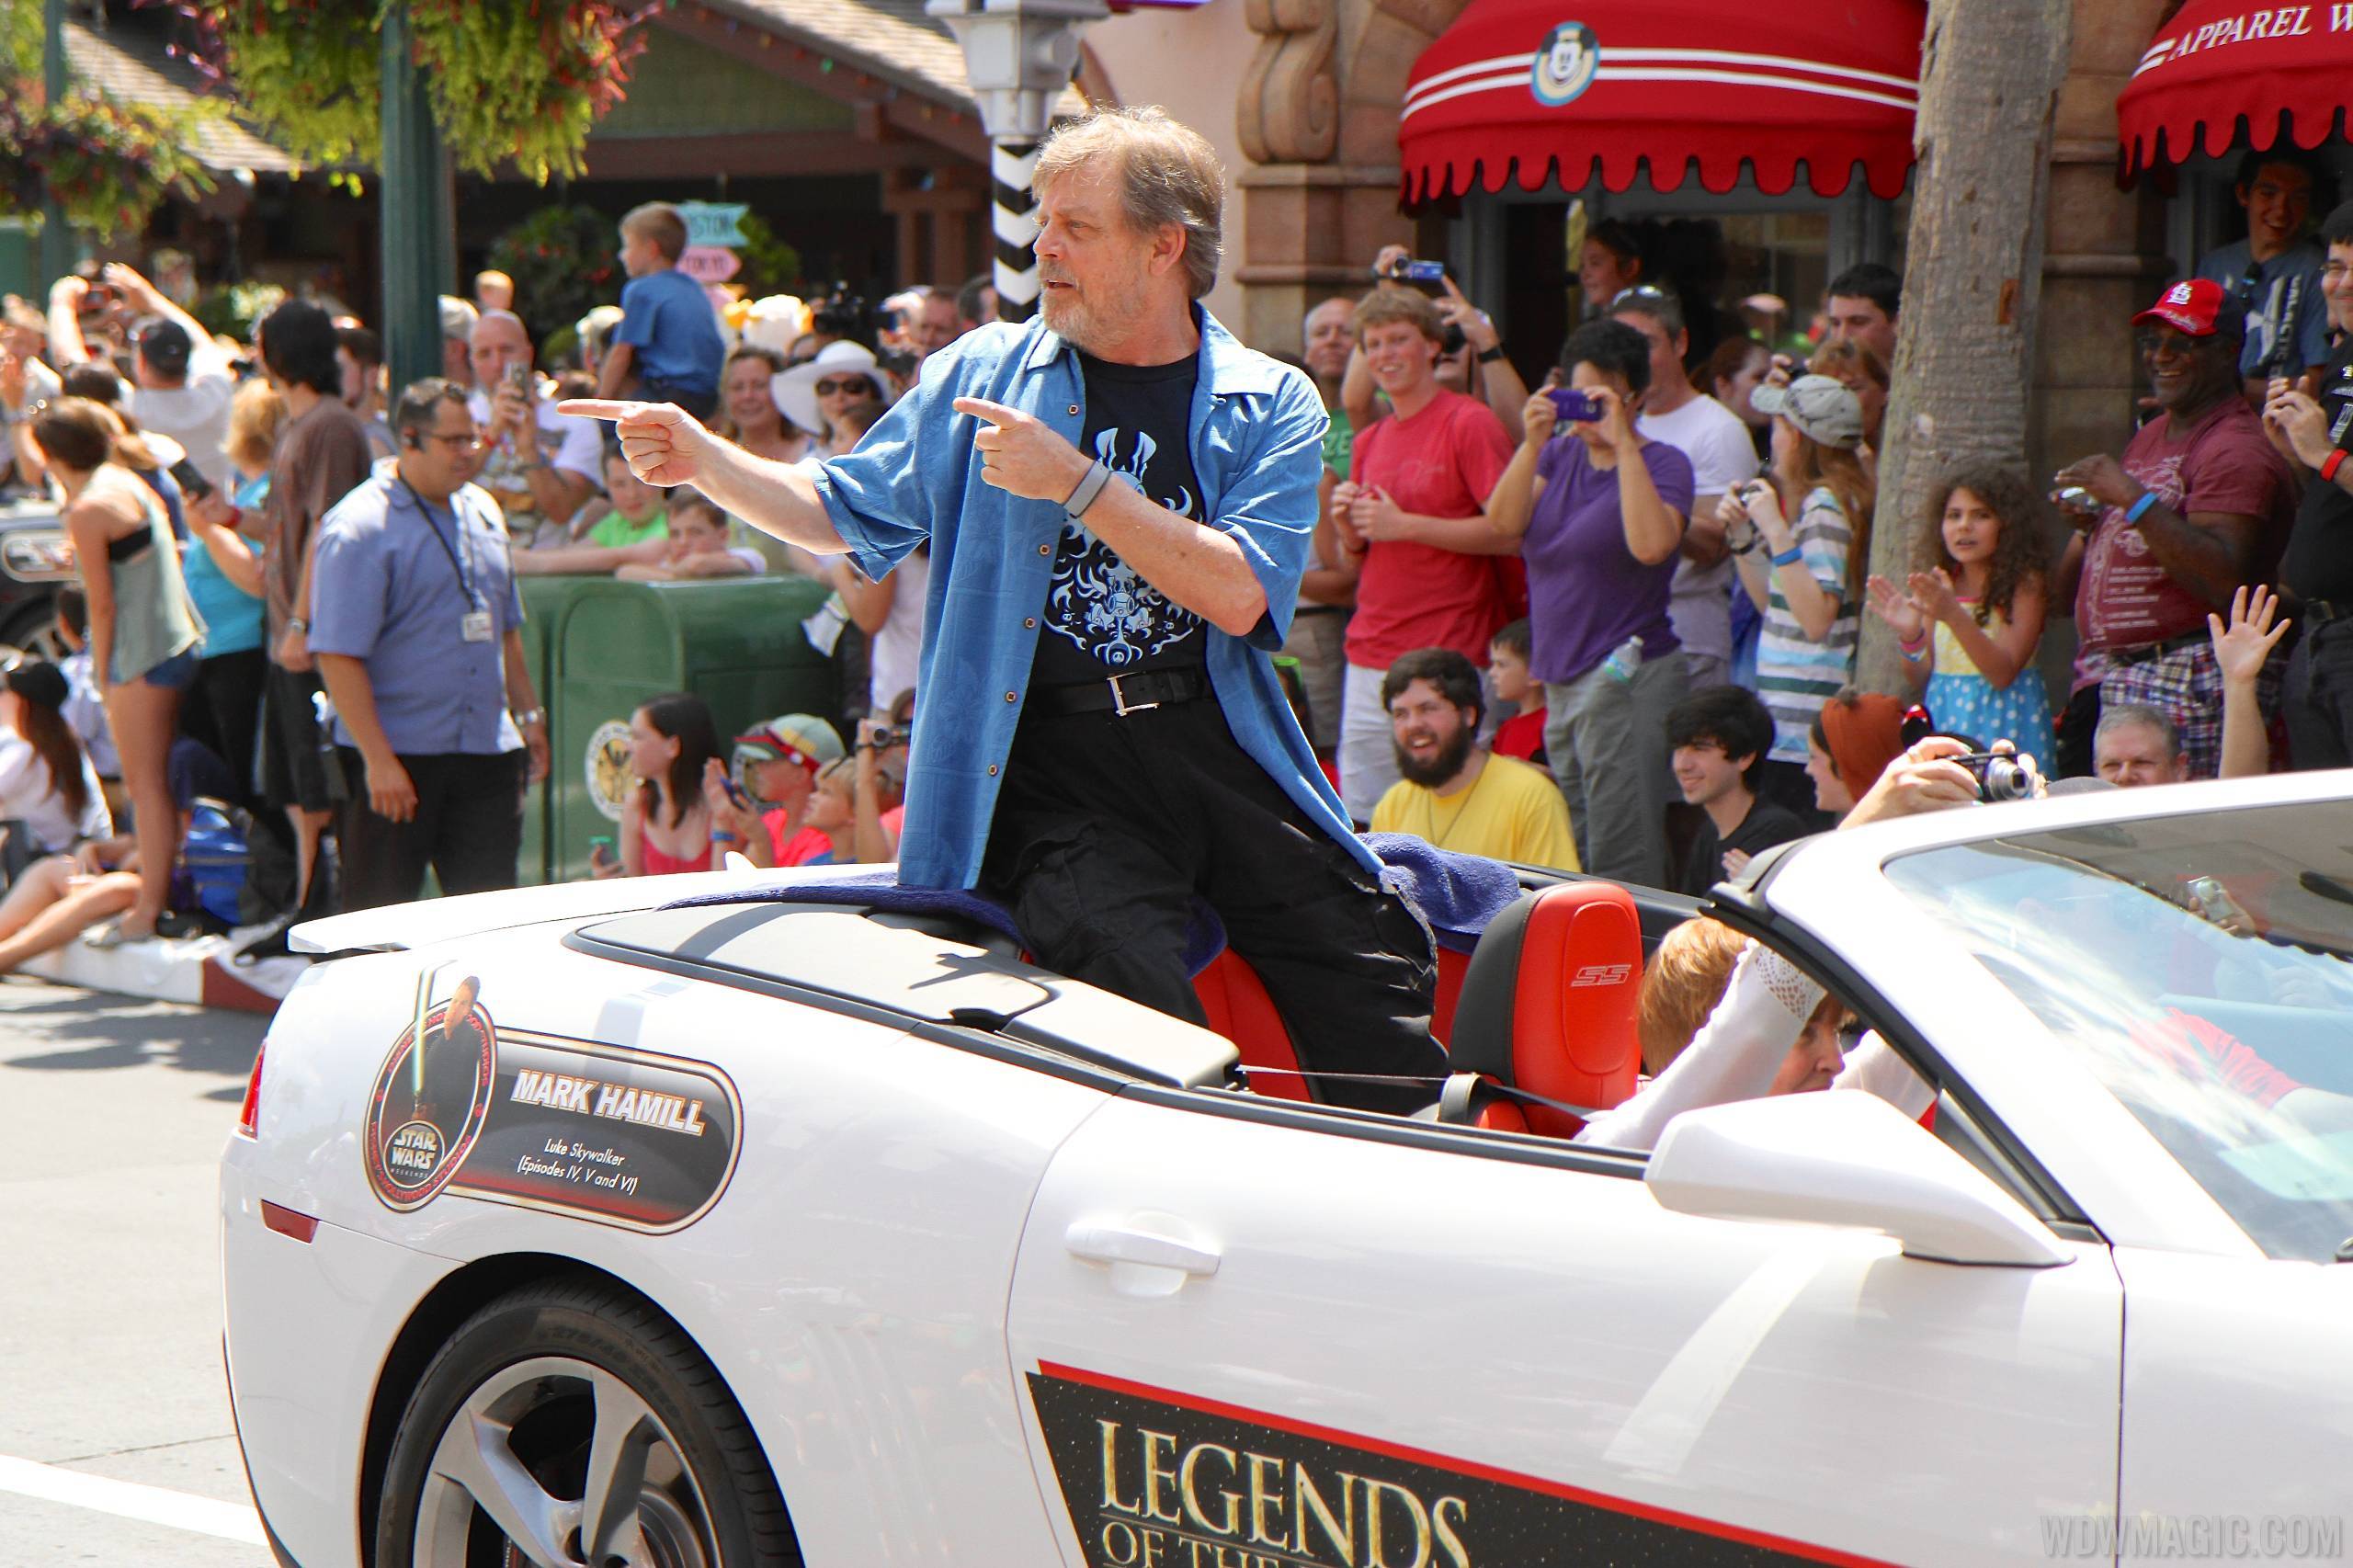 PHOTOS - Mark Hamill appears for the first time at Star Wars Weekends